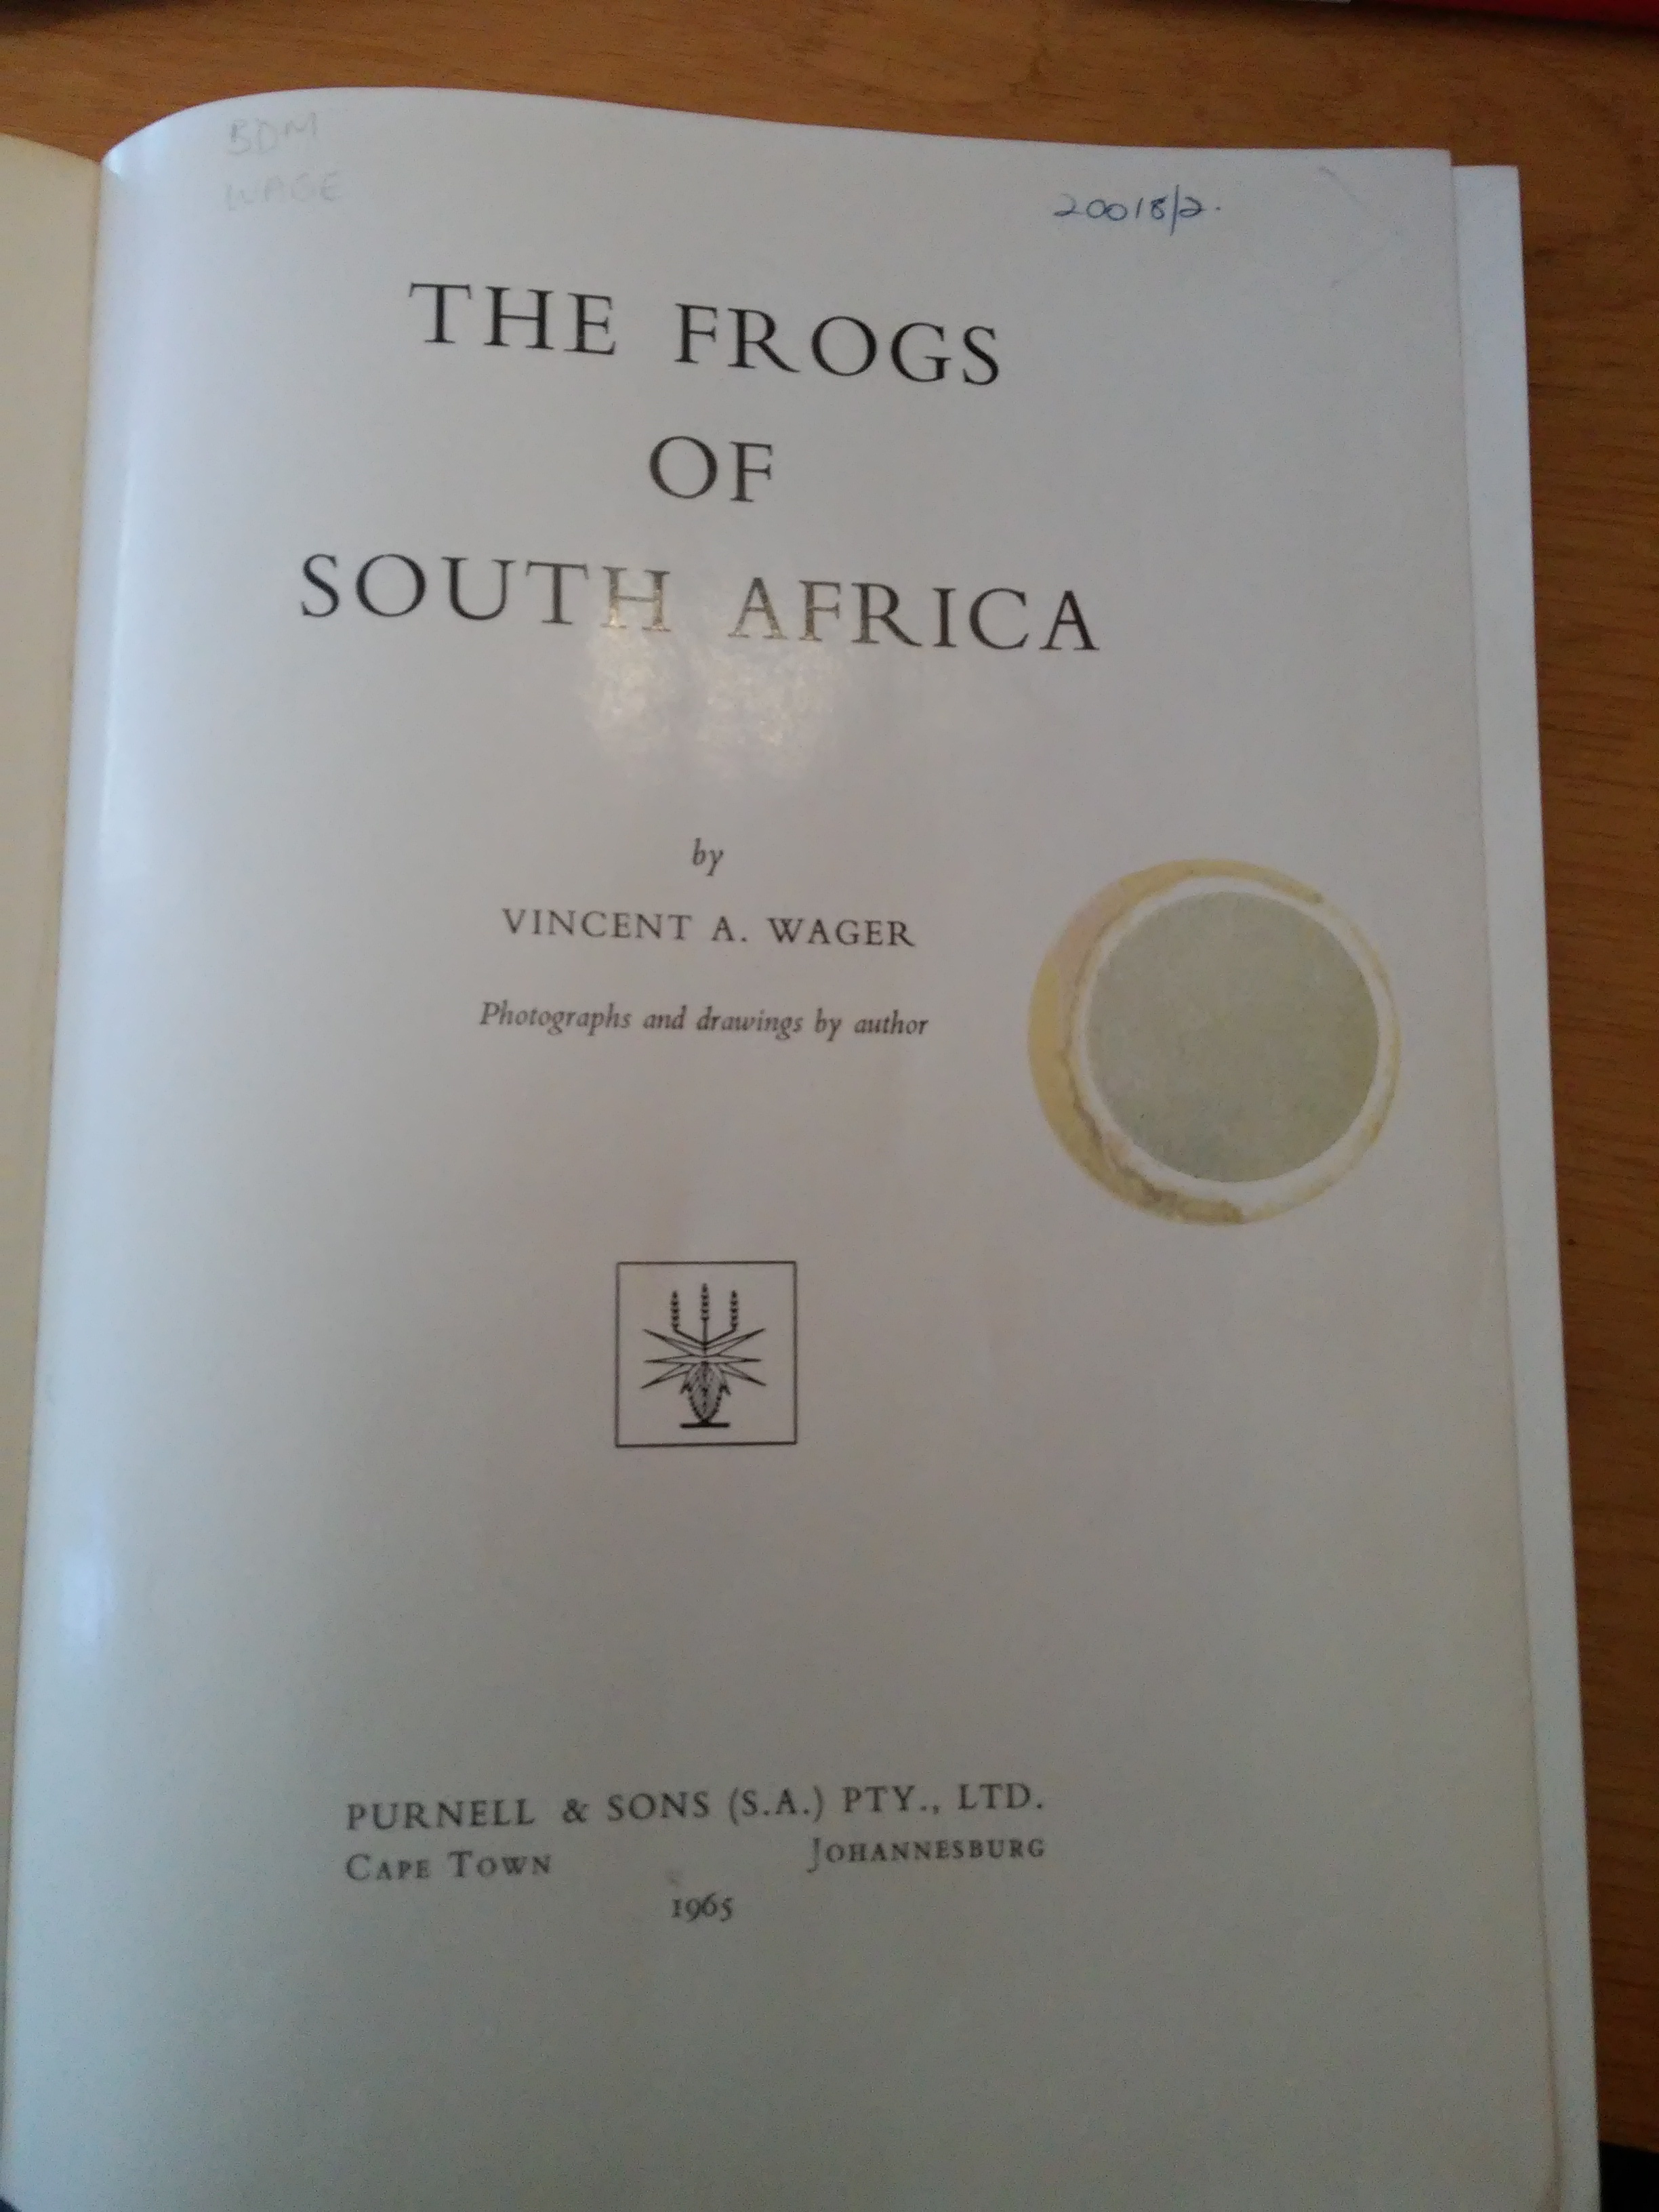 Vincent A Wager: The Frogs of South Africa (Rippl-Rónai Múzeum CC BY-NC-SA)